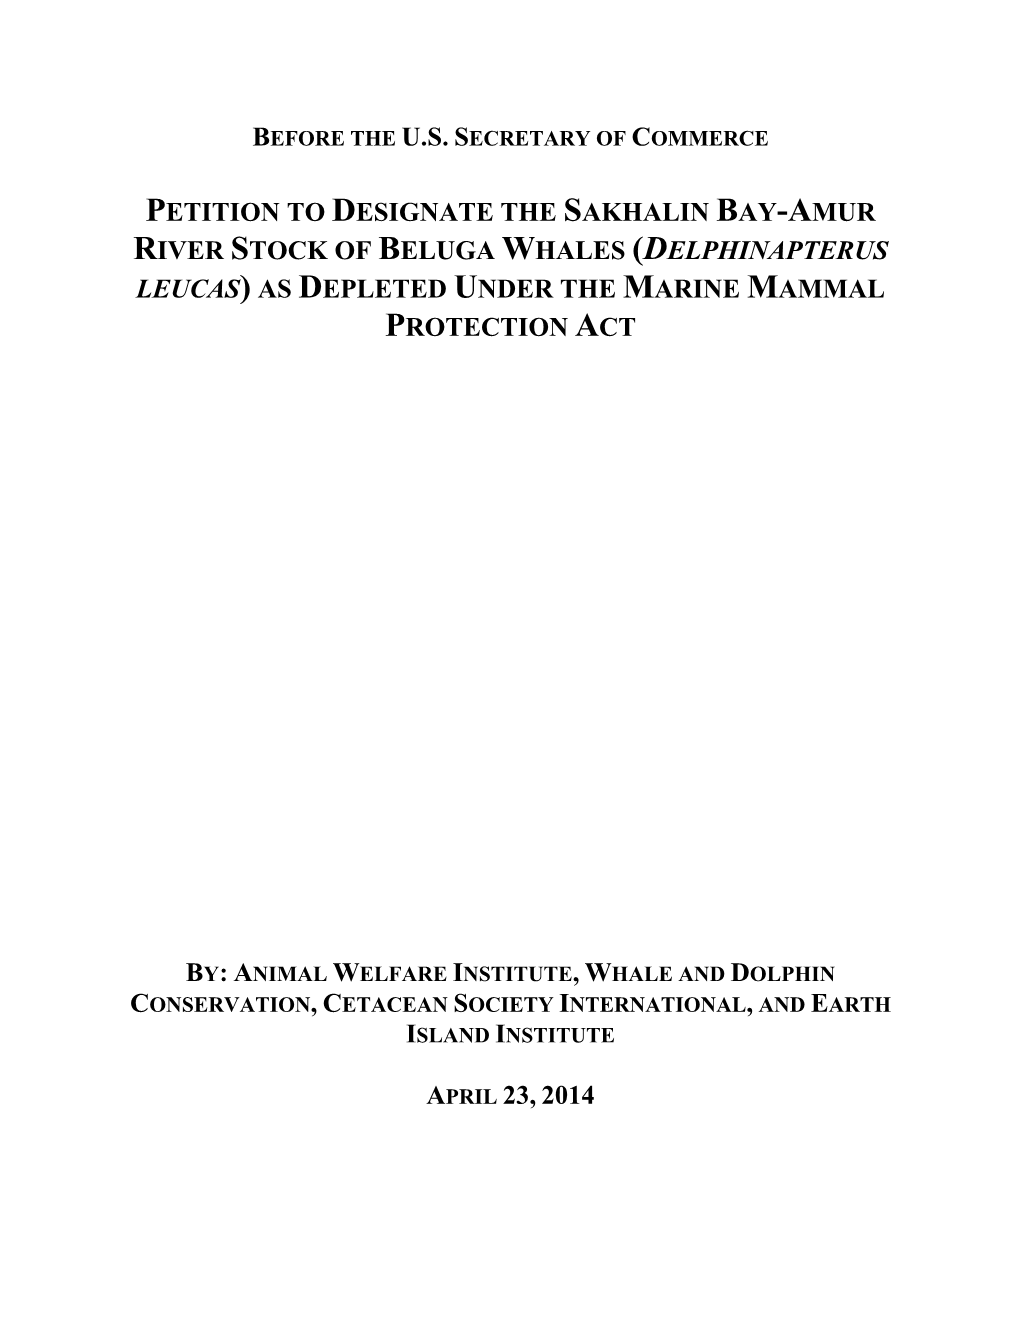 Petition to Designate the Sakhalin Bay-Amur River Stock of Beluga Whales (Delphinapterus Leucas) As Depleted Under the Marine Mammal Protection Act